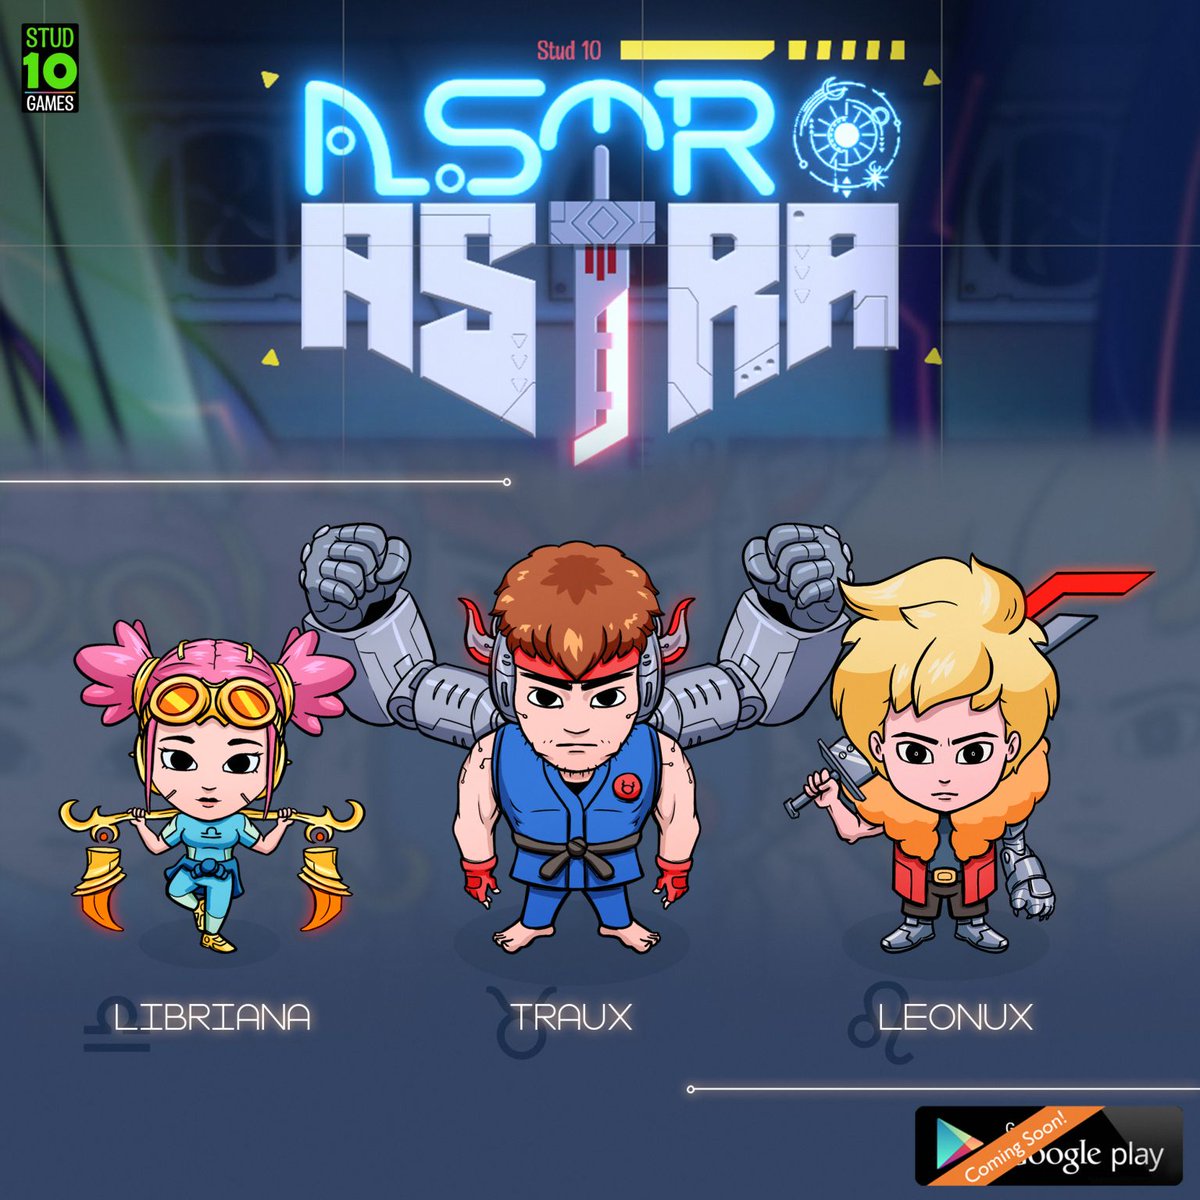 Meet fighters from our game #AstroAstrA
Stay tuned for more updates, and follow us on #socialmedia!
#gamedev #gameart #conceptart #mobilegames #casualgames #hypercasualgames #unitygames #astrology